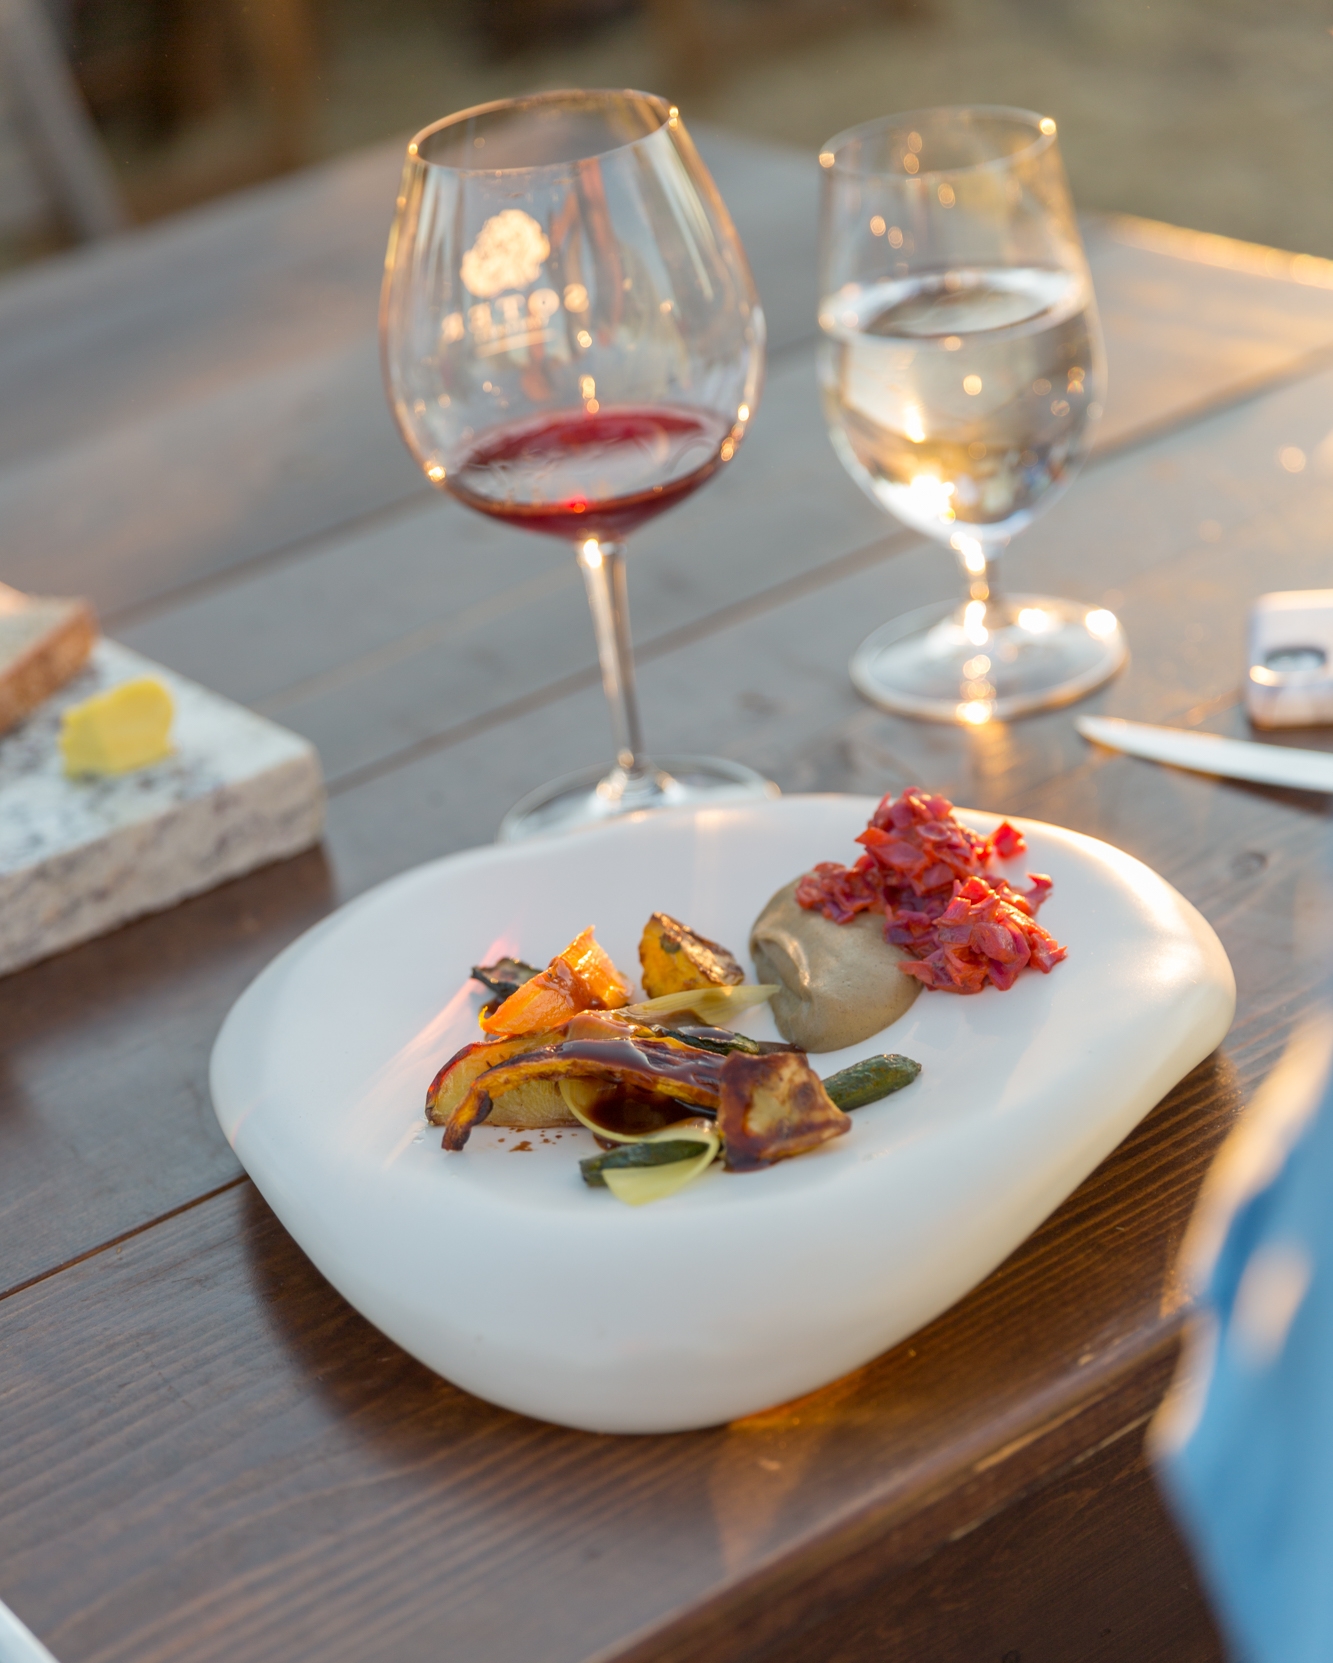 c stoll soter winery ipnc 2018 cloud plate table setting  .jpg